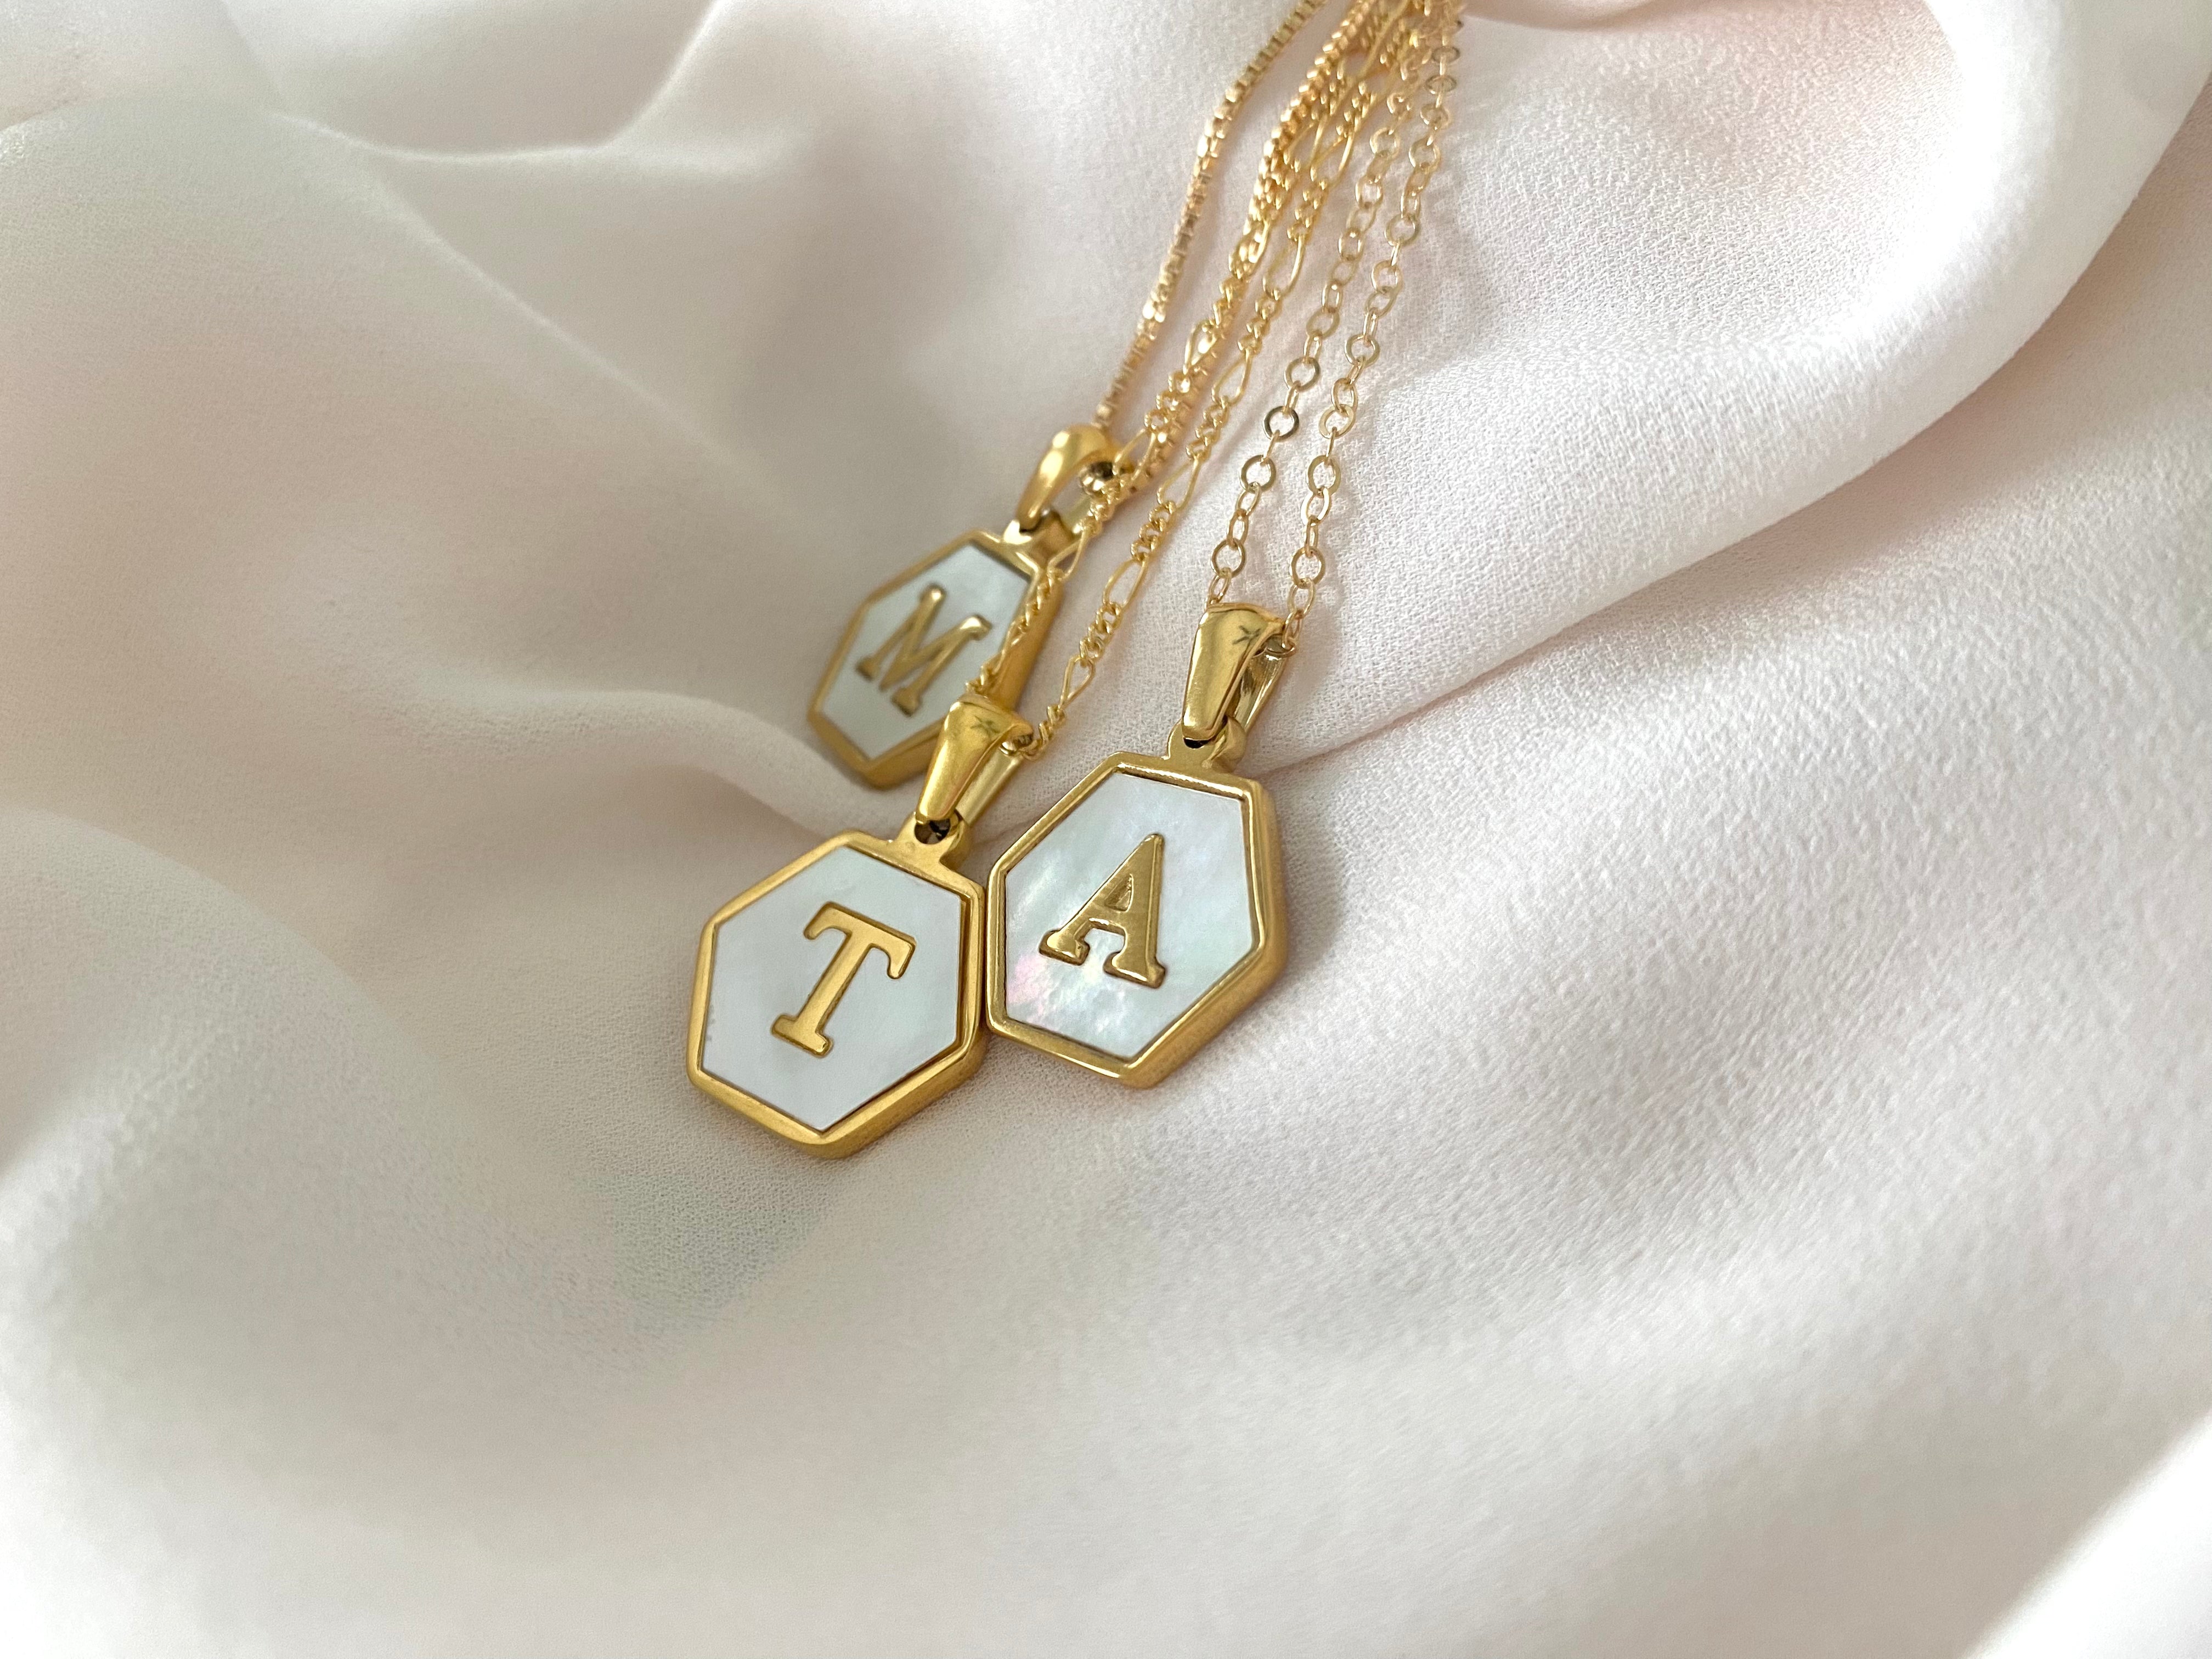 Gold Hexagon Mother of Pearl Letter Pendant Necklace - Gold Filled Chain - Customizable Gifts